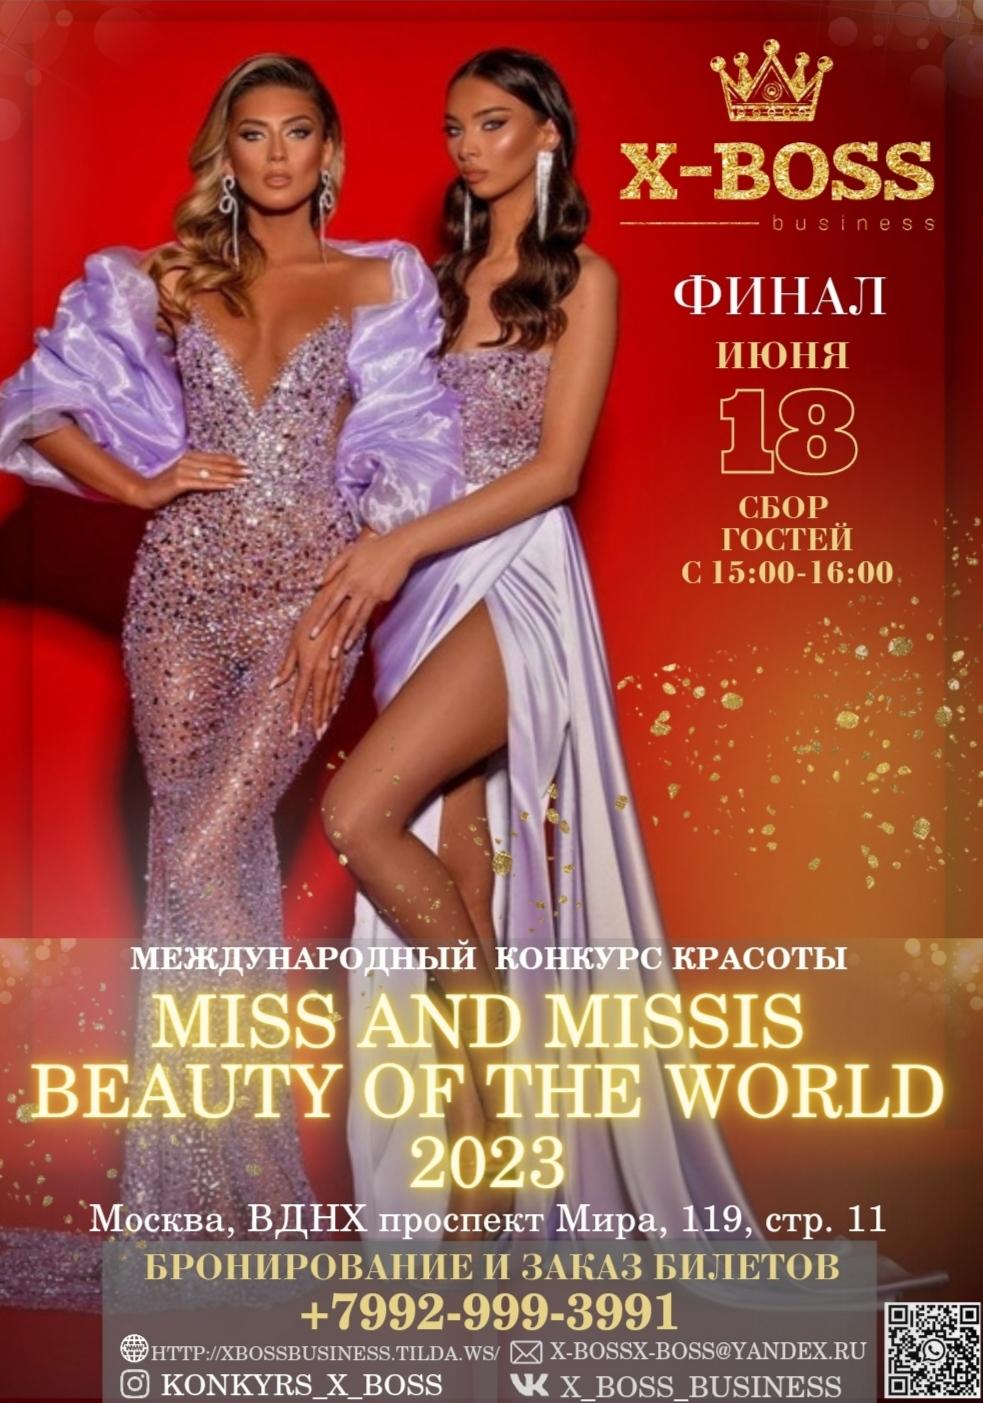 Miss and Missis Beauty of the World 